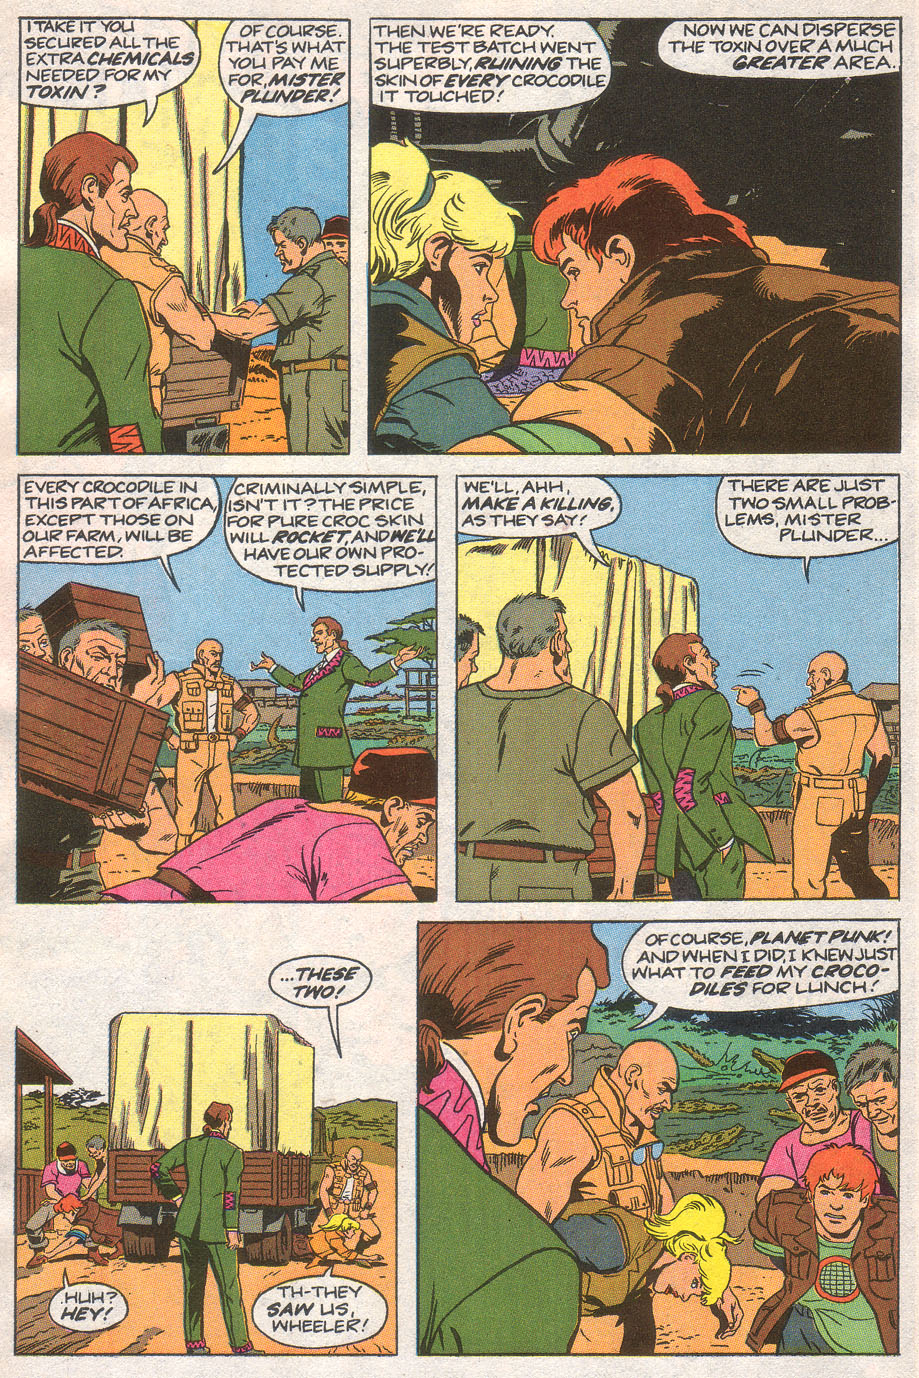 Captain Planet and the Planeteers 7 Page 25